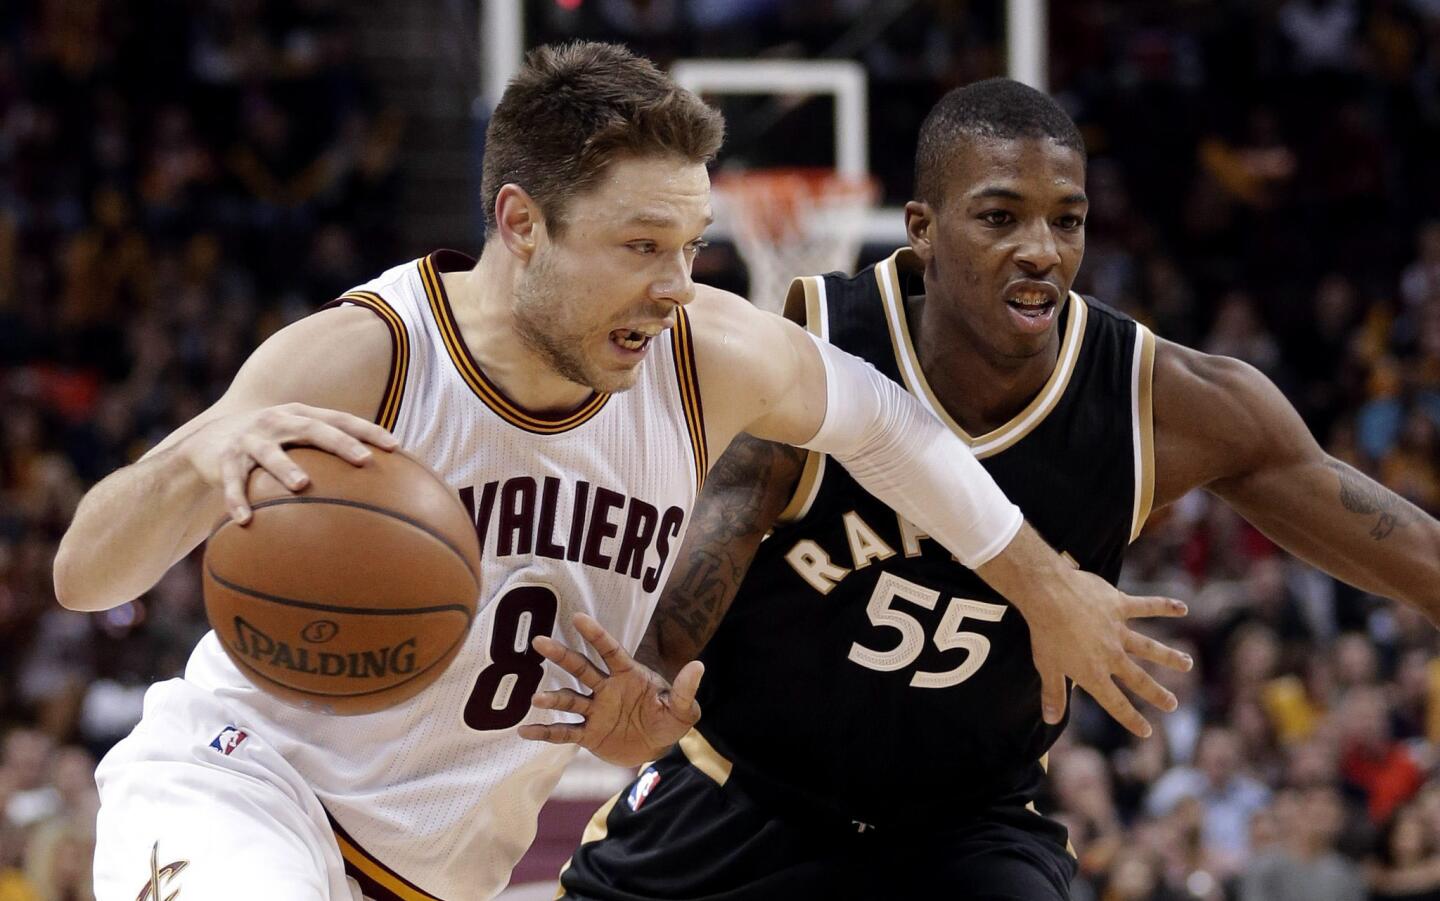 Cavaliers point guard Matthew Dellavedova, who is driving past Raptors guard Delon Wright during a game Jan. 4, is considered by many to be the NBA's dirtiest player.